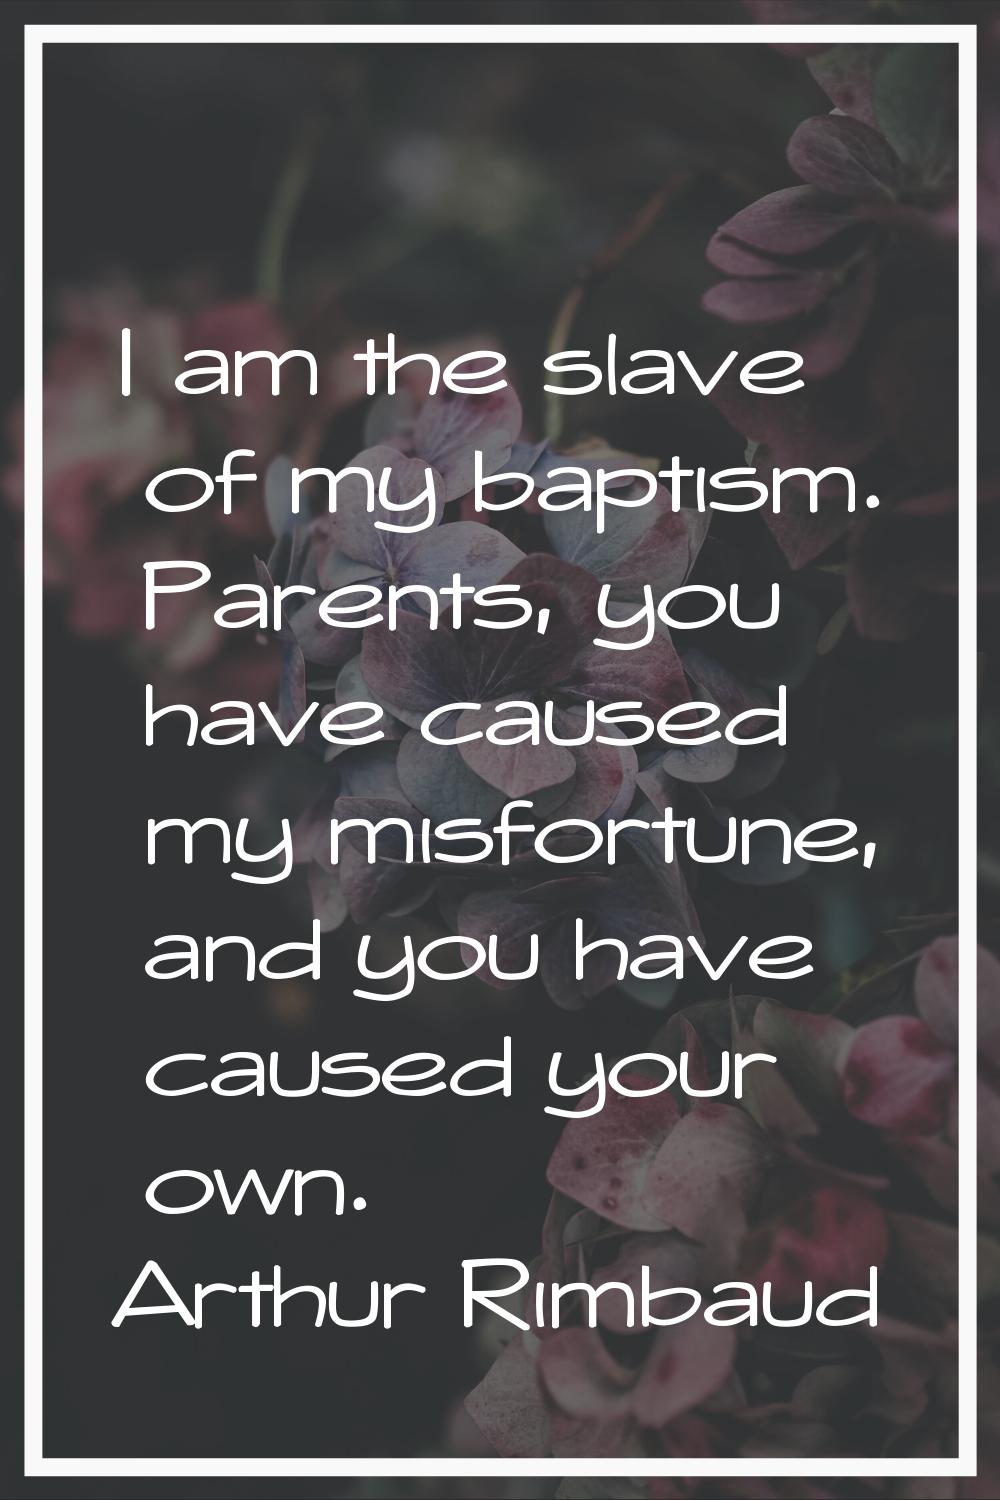 I am the slave of my baptism. Parents, you have caused my misfortune, and you have caused your own.